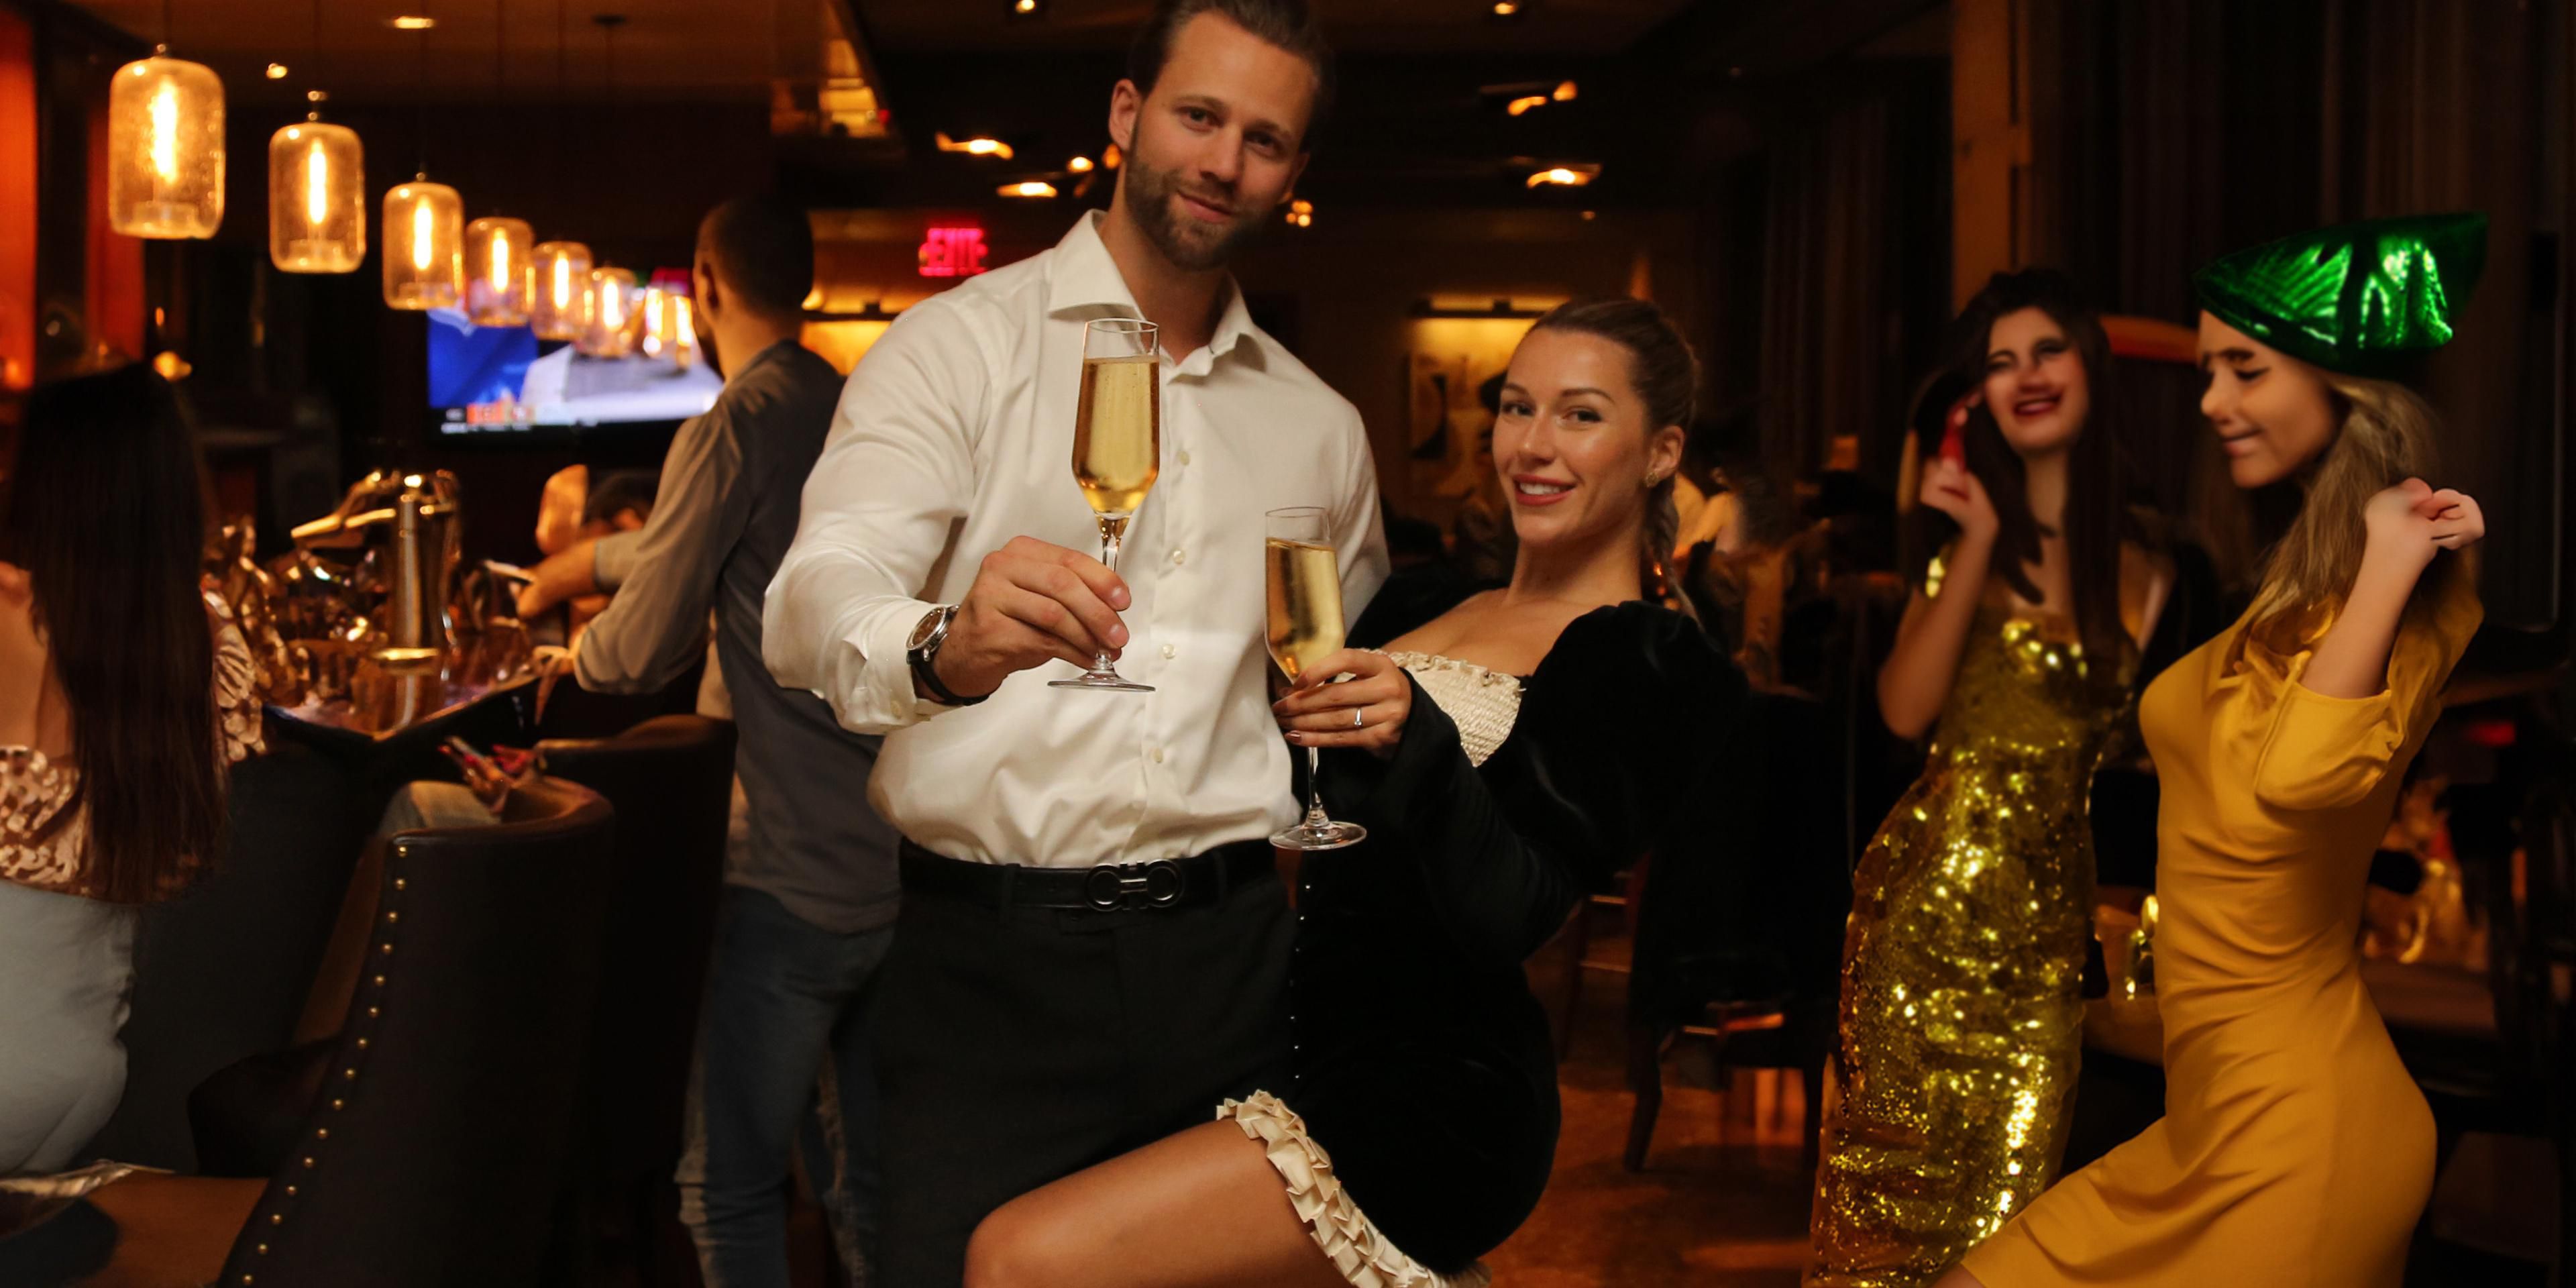 The countdown to the New Year's Eve has begun! Join us and ring in 2024 steps from Times Square festivities at The Stinger Cocktail Bar & Kitchen with an open bar, canapés, and Live DJ. Party starts at 9 p.m. Book on Eventbrite with prices starting at $225* per person excluding taxes, booking fees, and gratuities. 